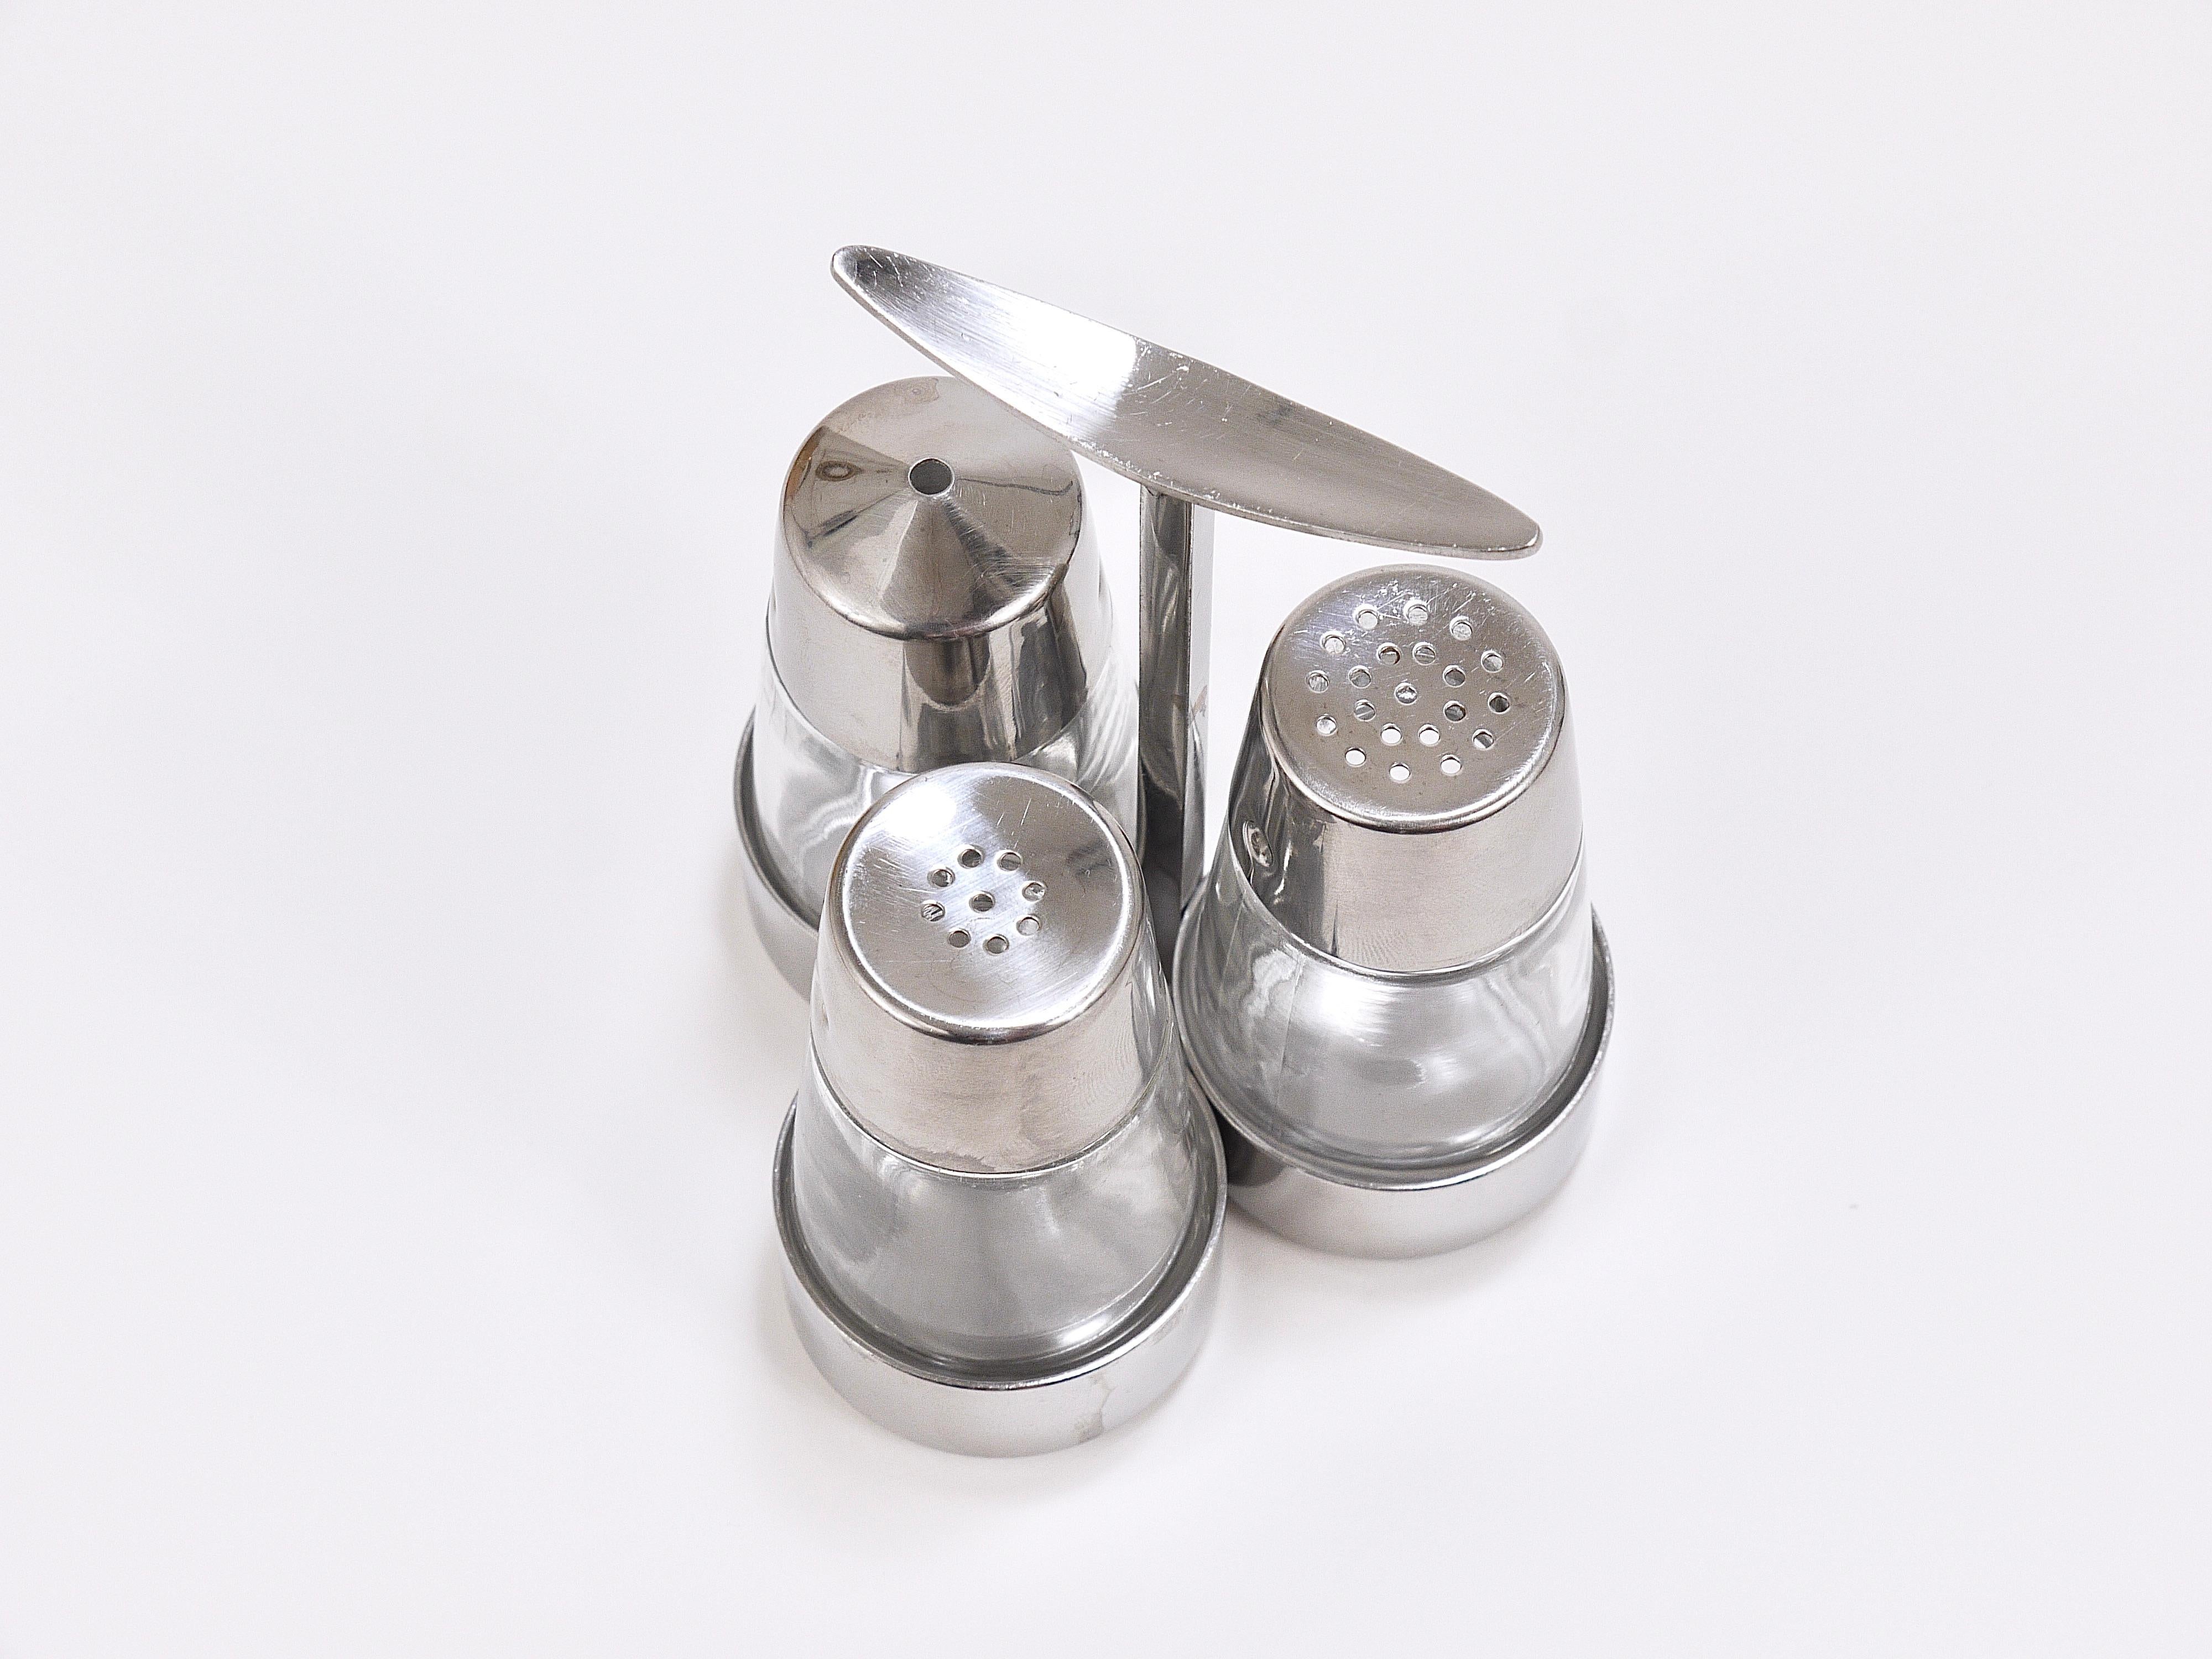 A very stylish modernist cruet set from the 1960s. Designed by the German artist and designer Marianne Denzel, executed by Berndorf Austria. Consist of a stainless steel holder / stand with a beautiful handle, salt and pepper shakers and a toothpick